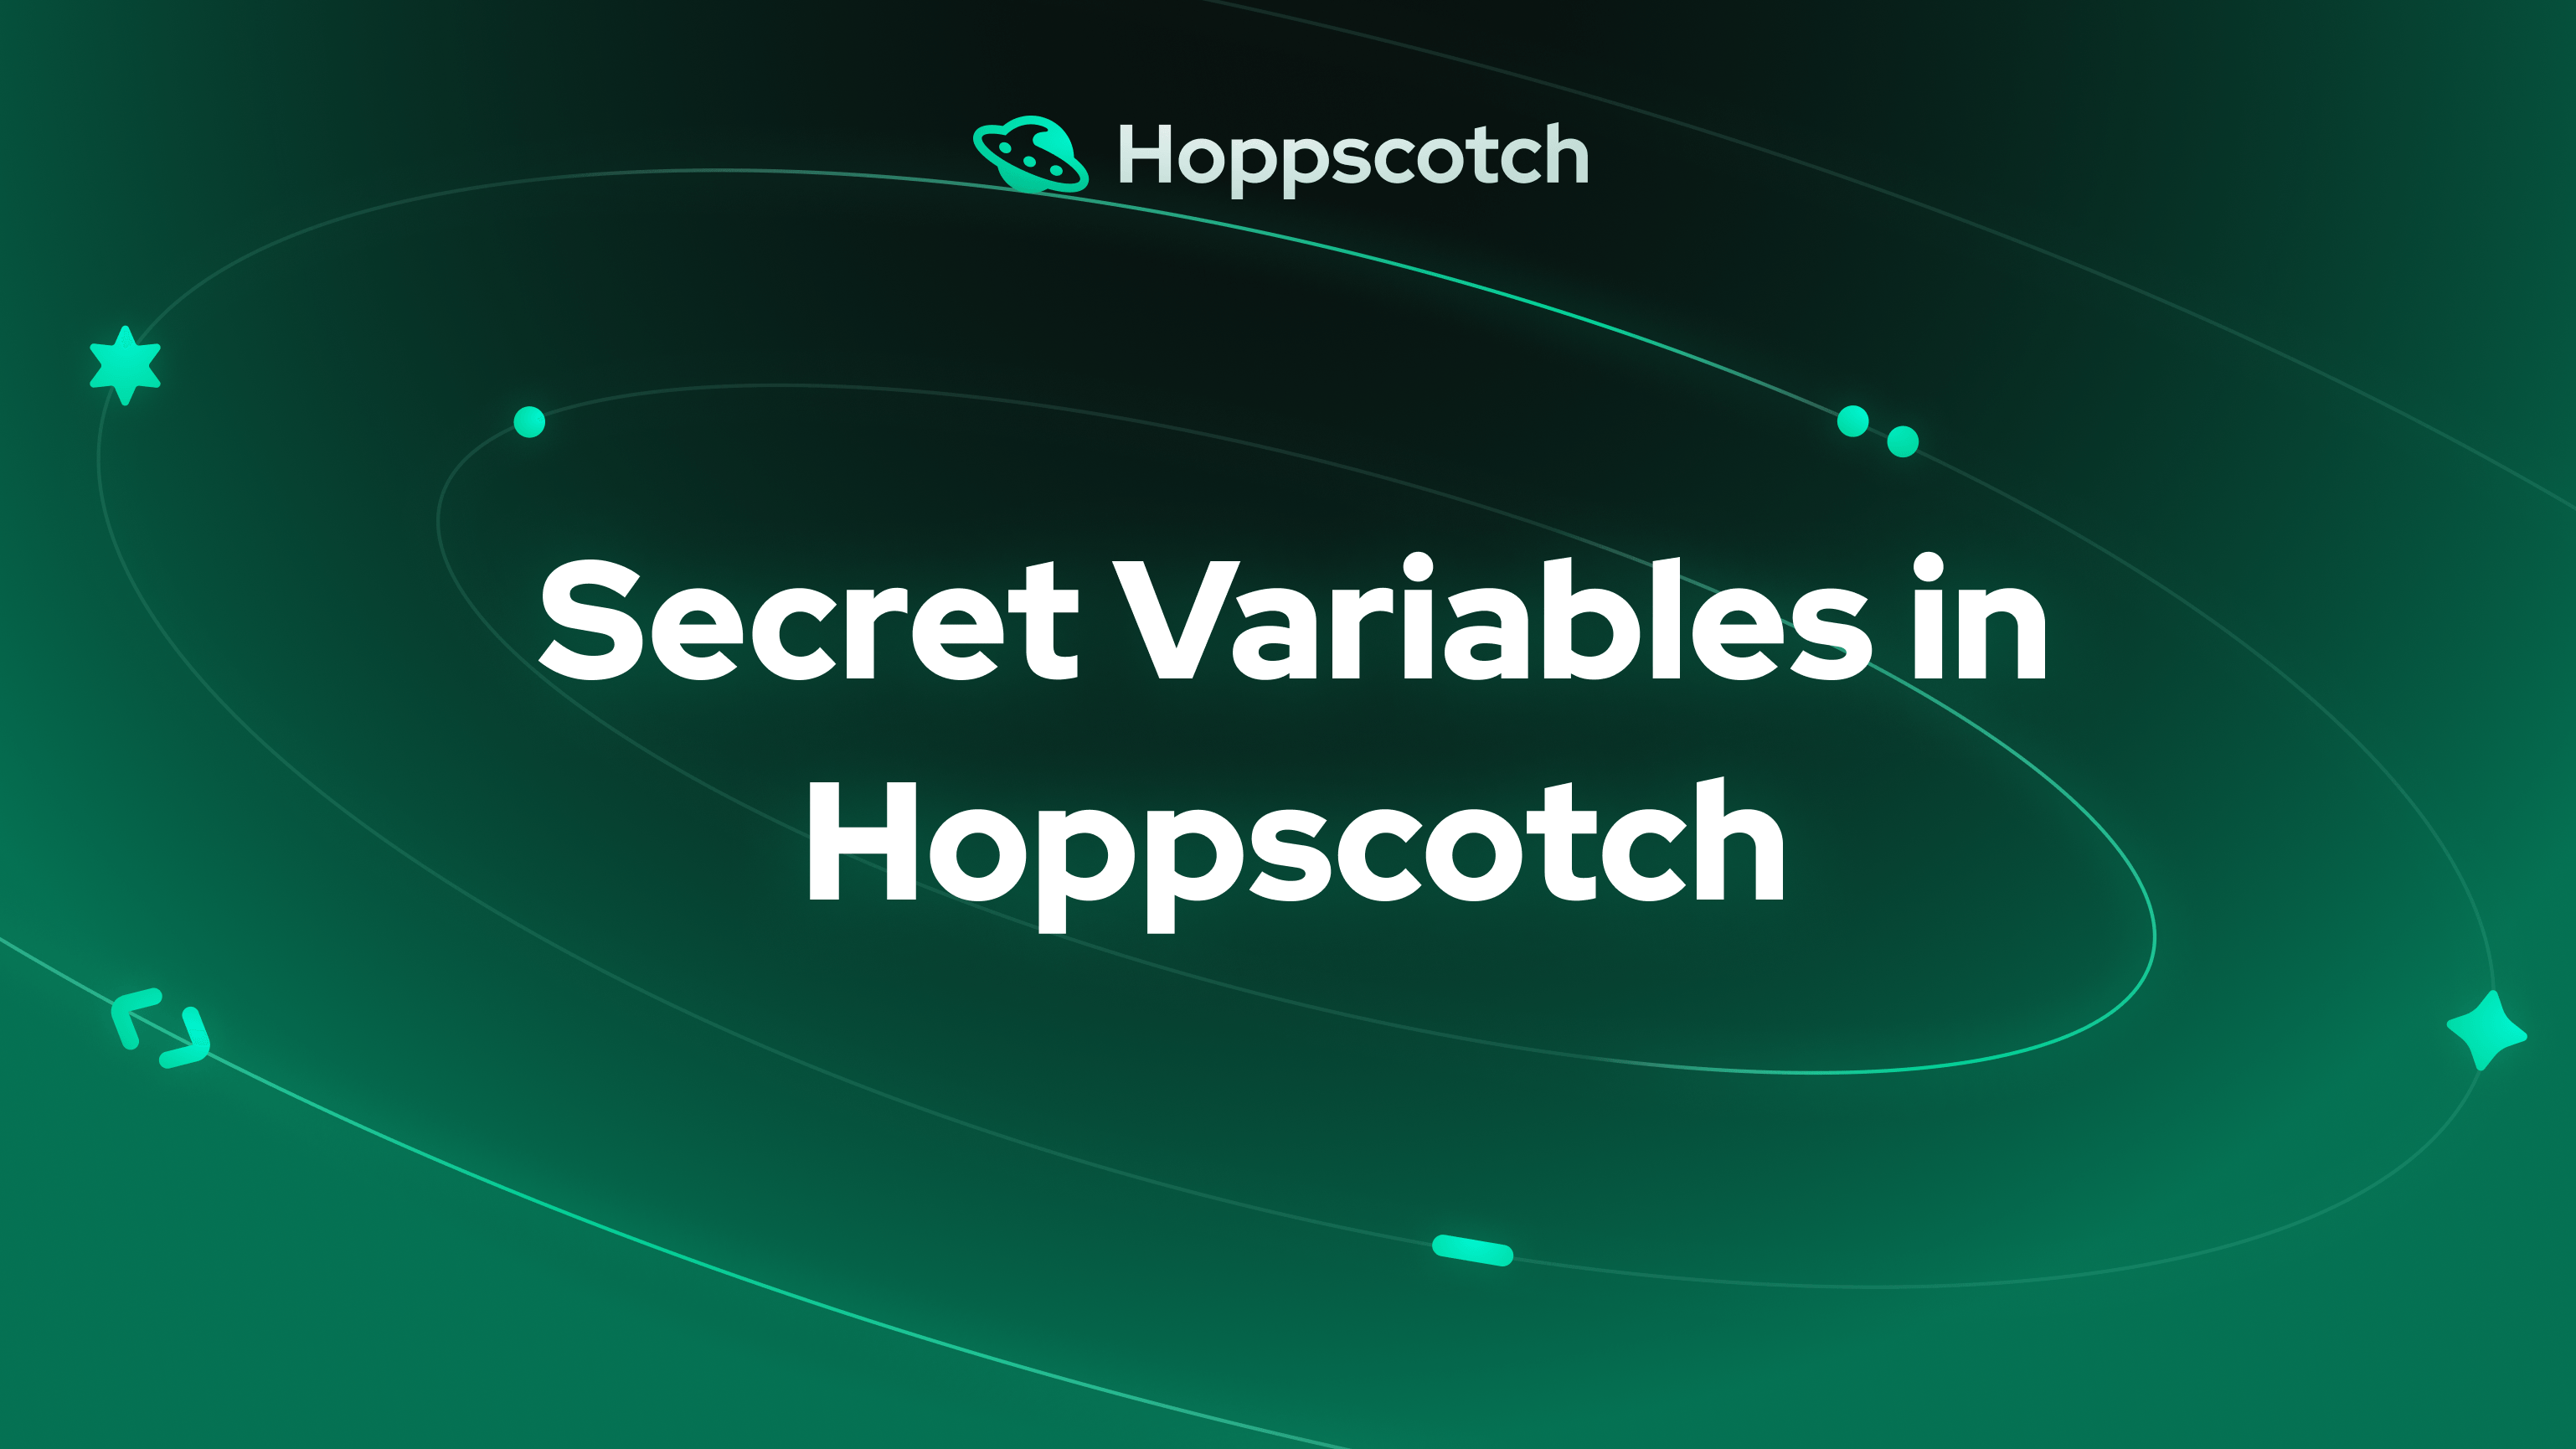 Introducing secret variables in Hoppscotch Environments